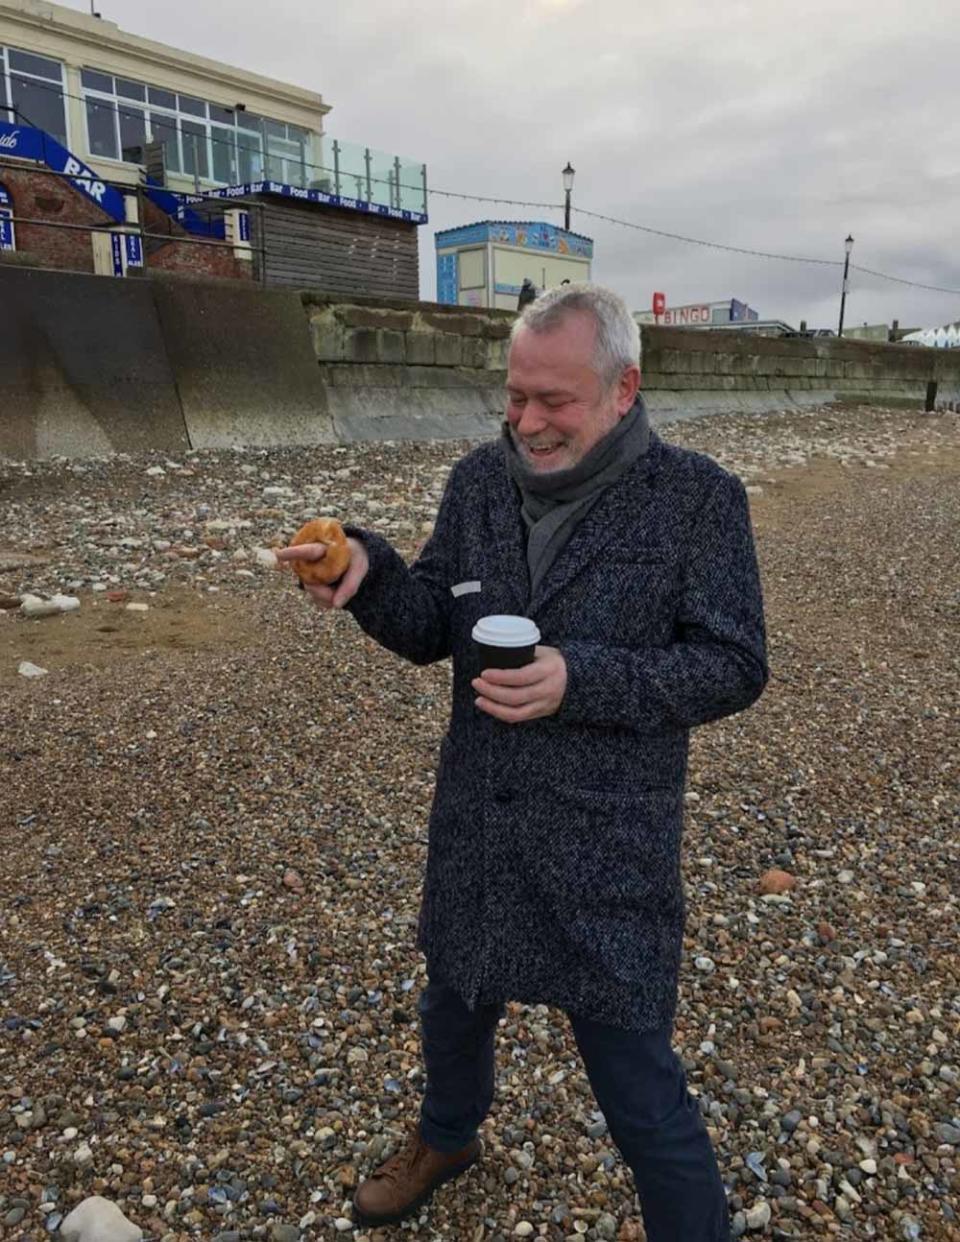 John proposed to Richard with a cinnamon ring doughnut on the beach. (Collect/PA Real Life)